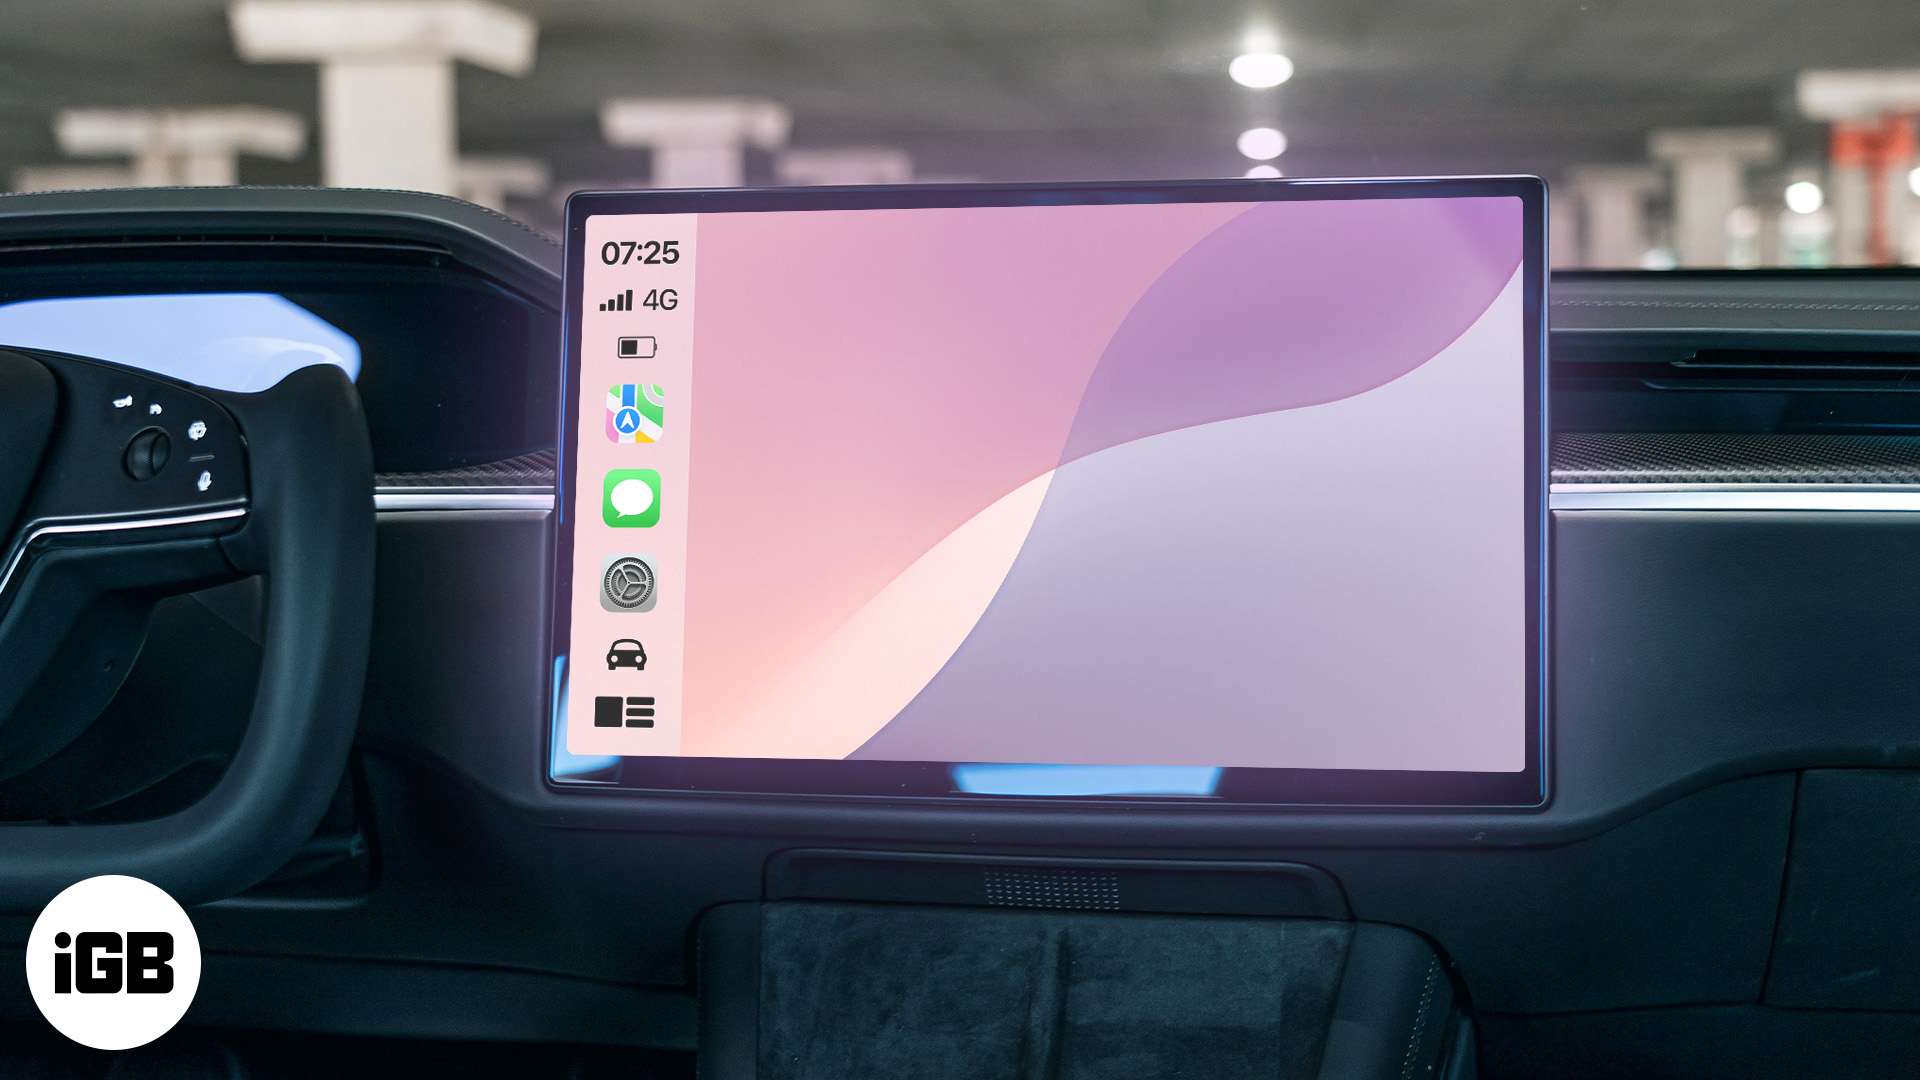 Download new CarPlay wallpapers that come with iOS 18 beta 4